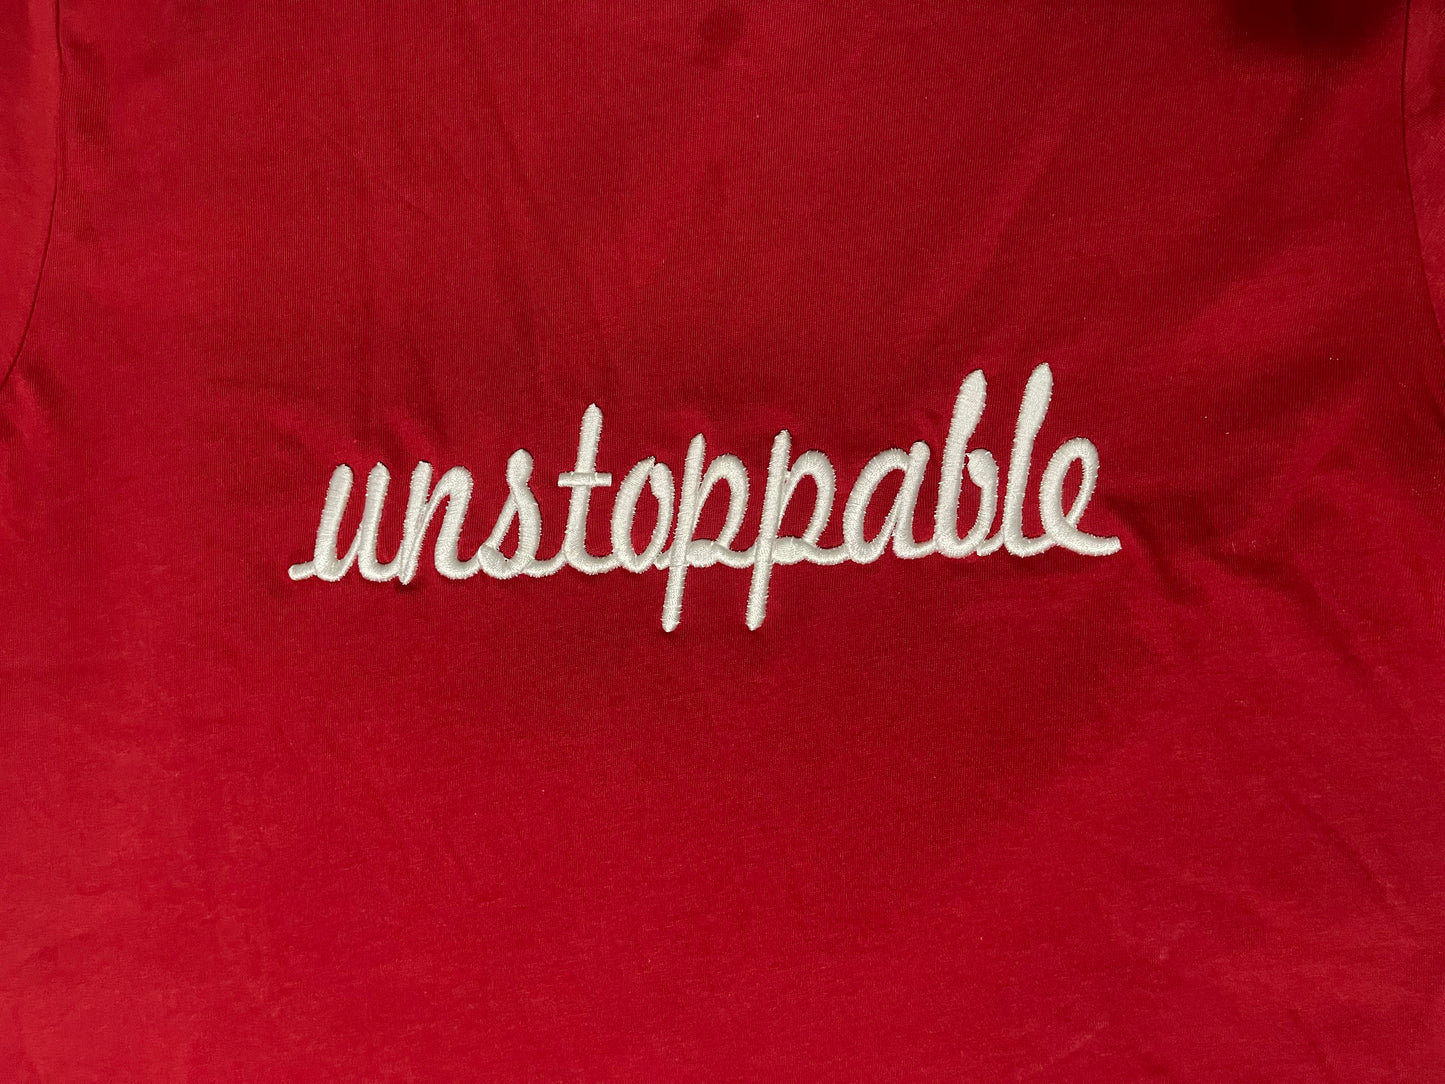 Unstoppable